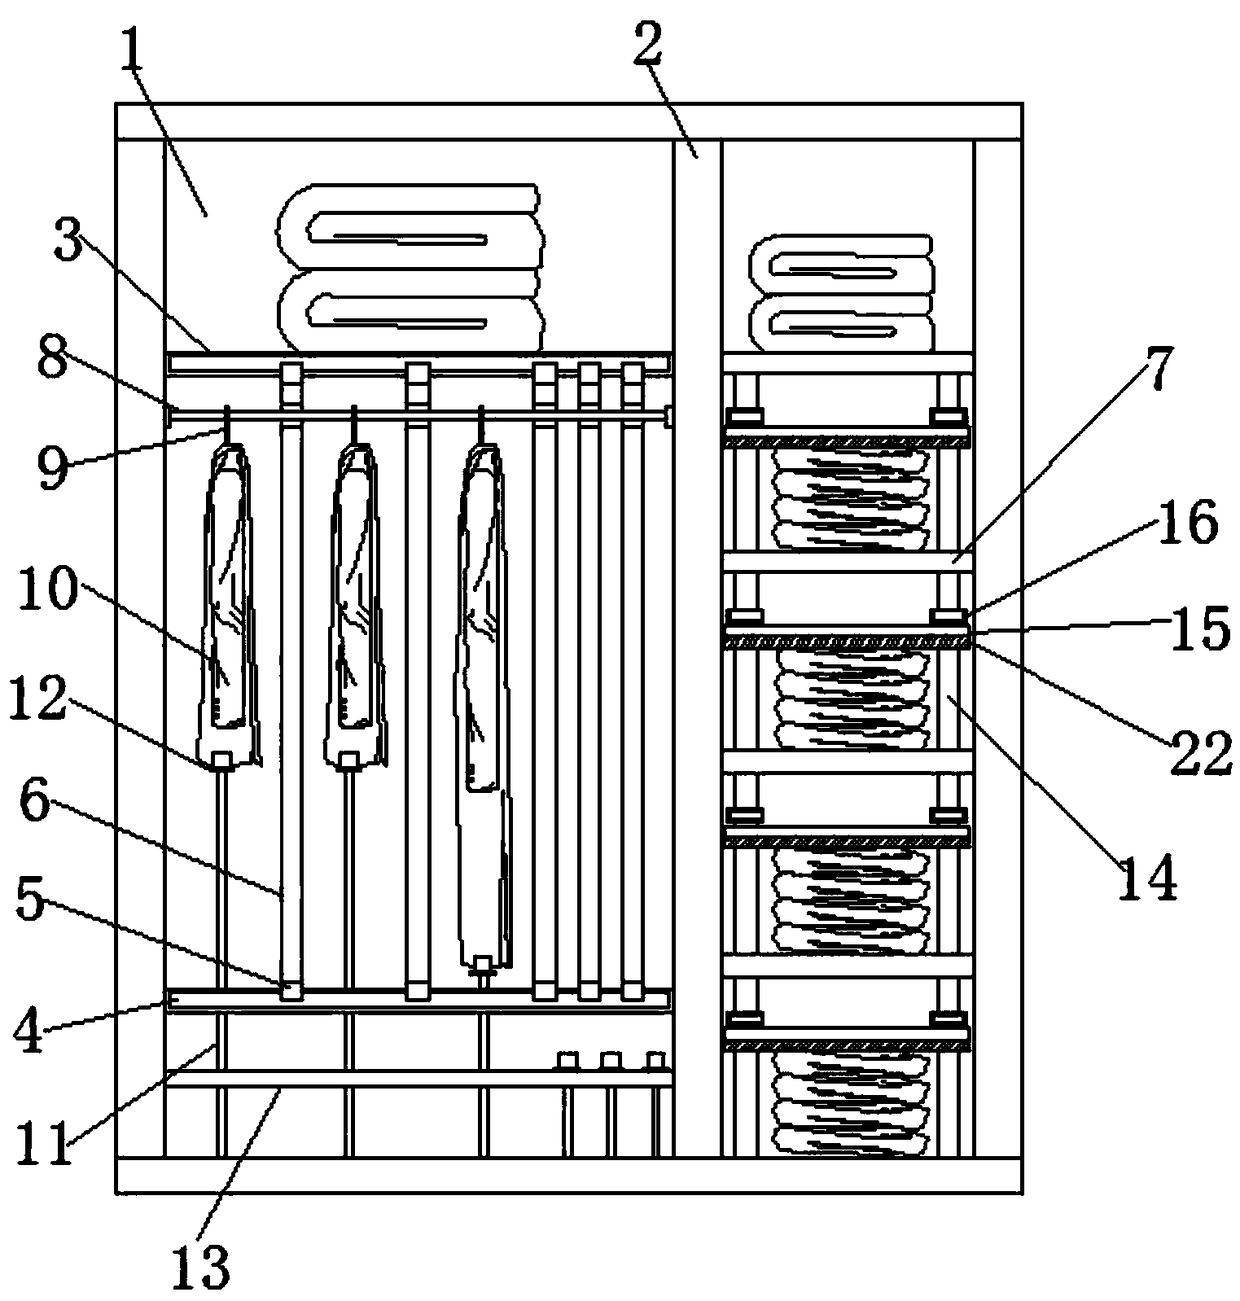 A push-pull type household wardrobe capable of fixing clothes